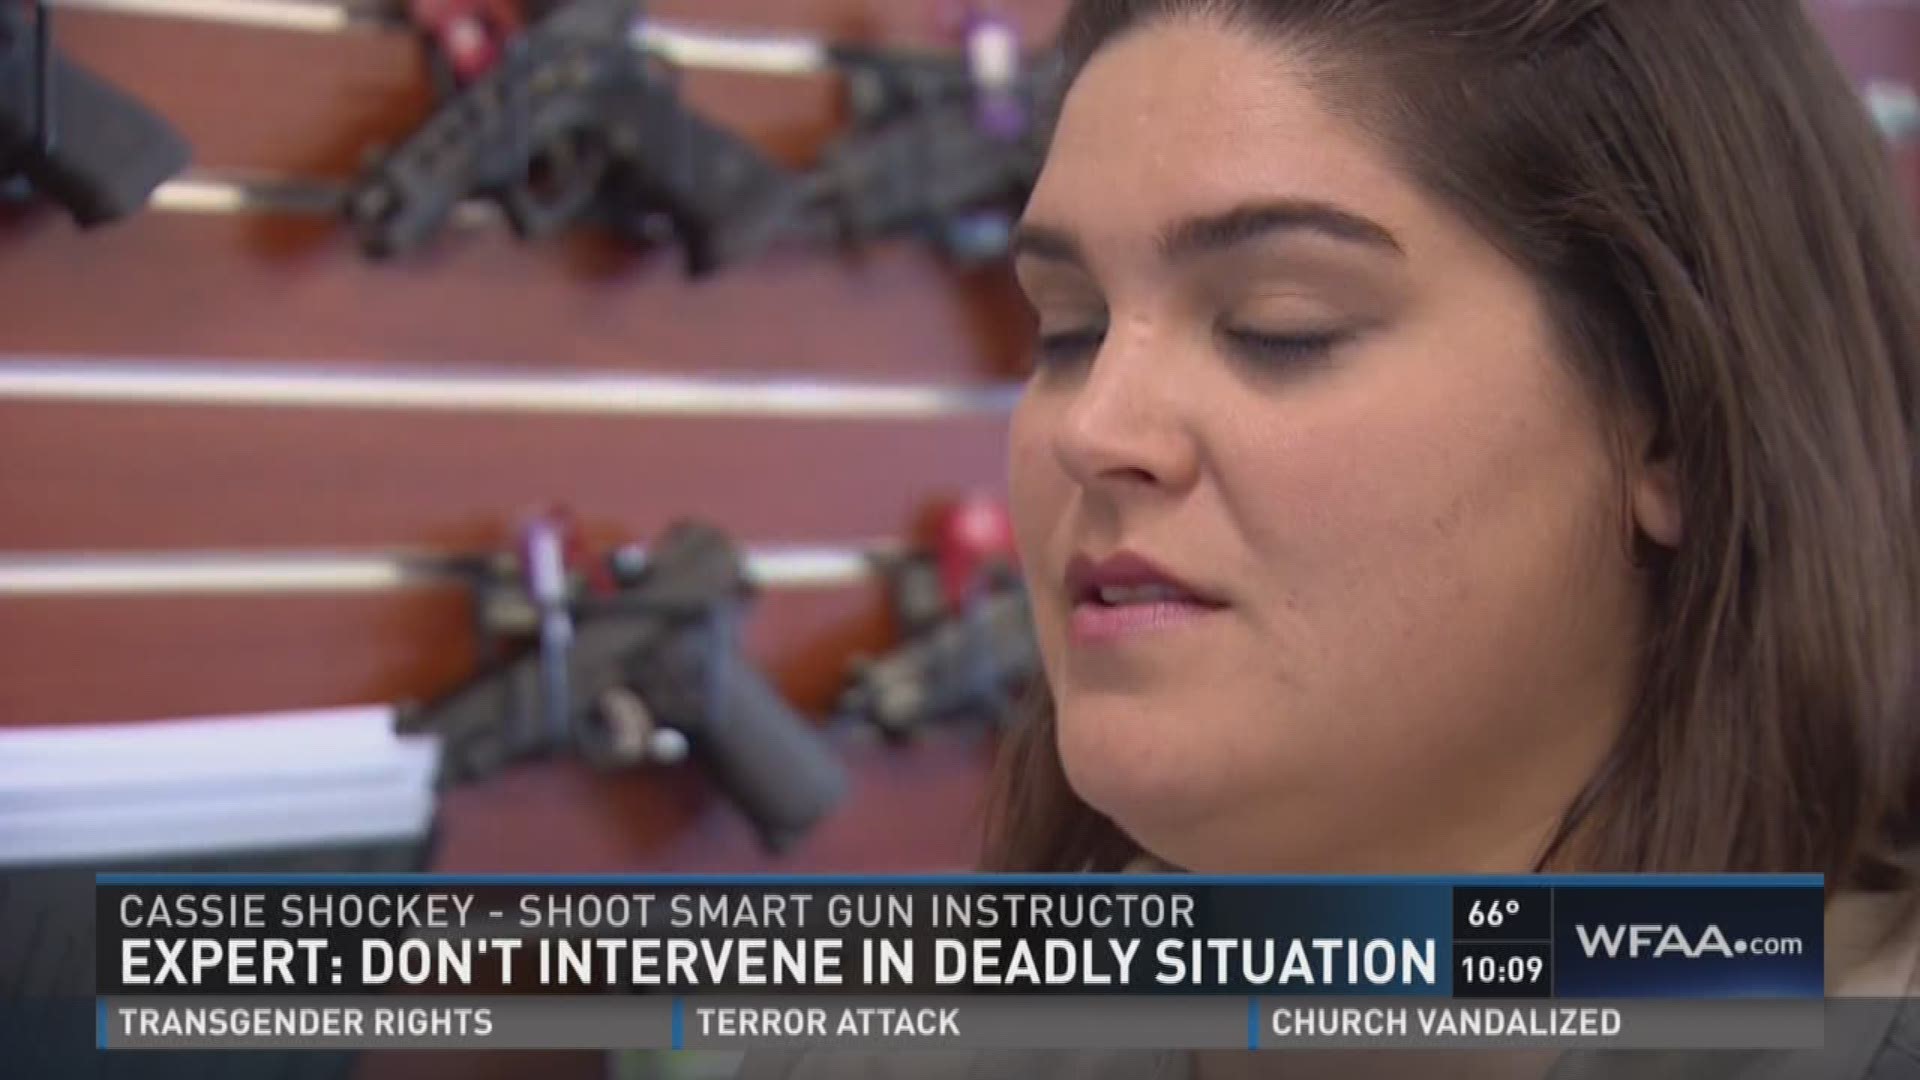 Expert: Don't intervene in deadly situation